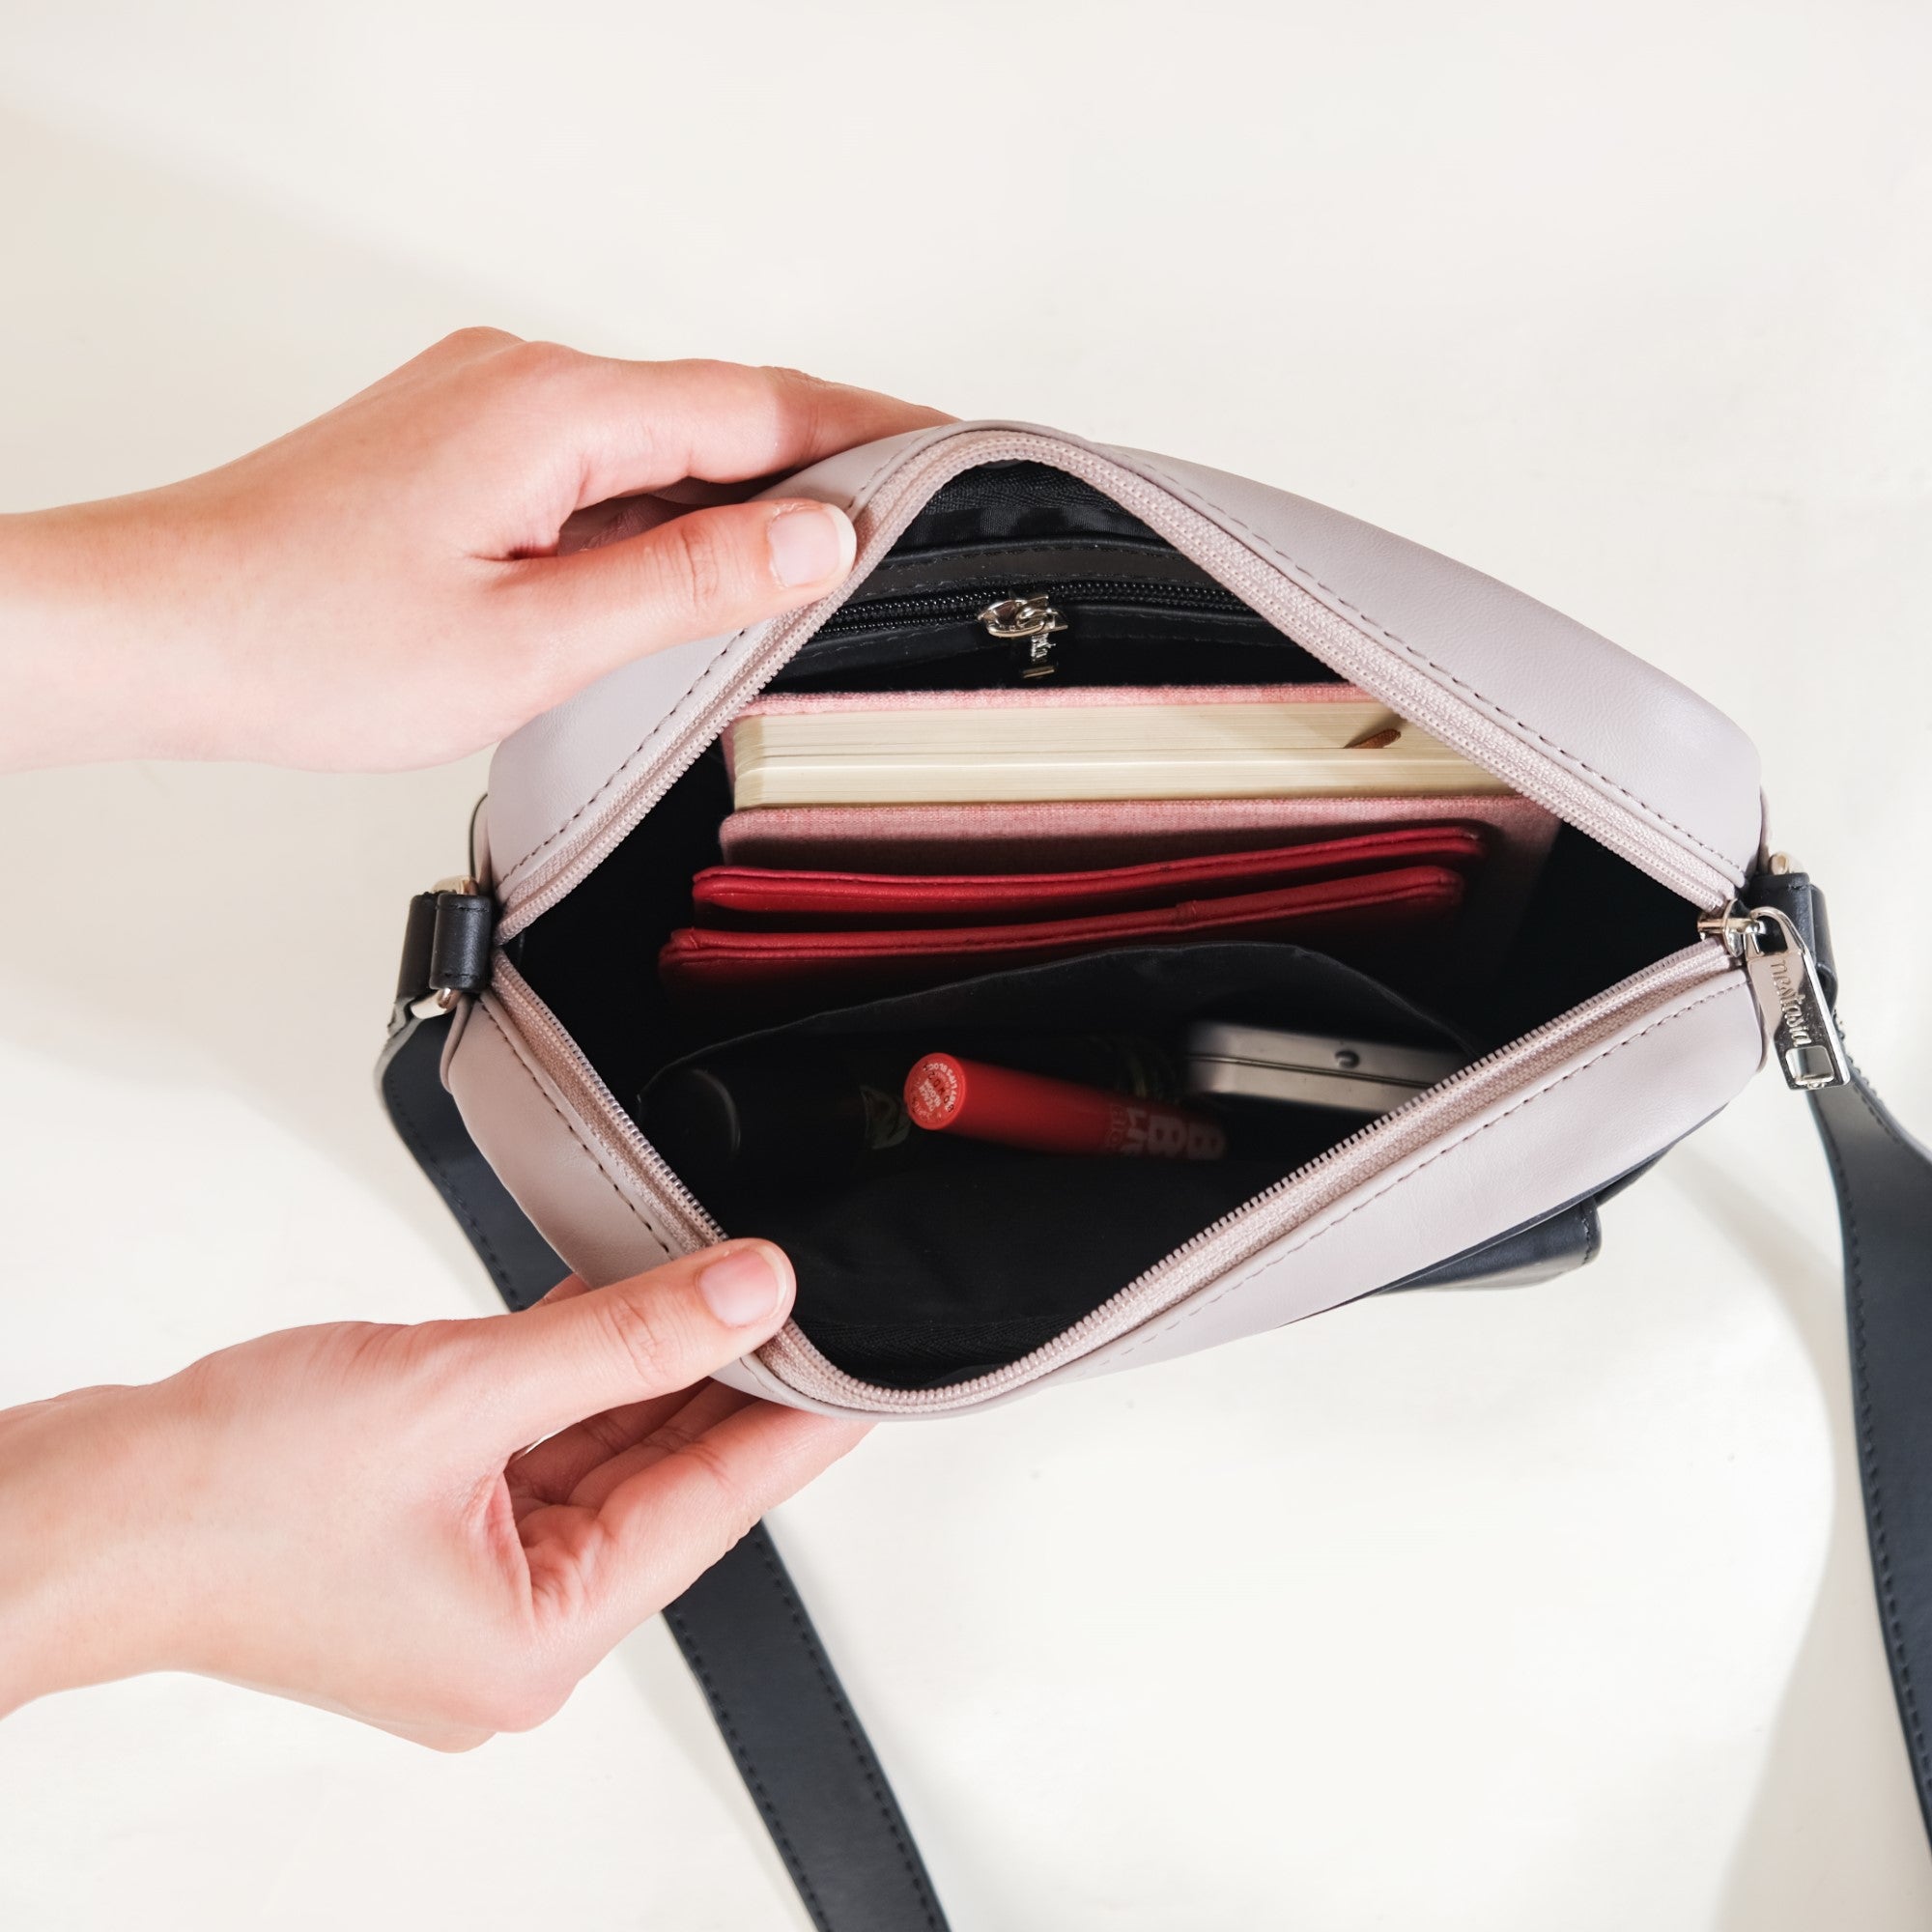 Kate Spade bags for fall 2021: Totes, crossbody bags, satchels, and more